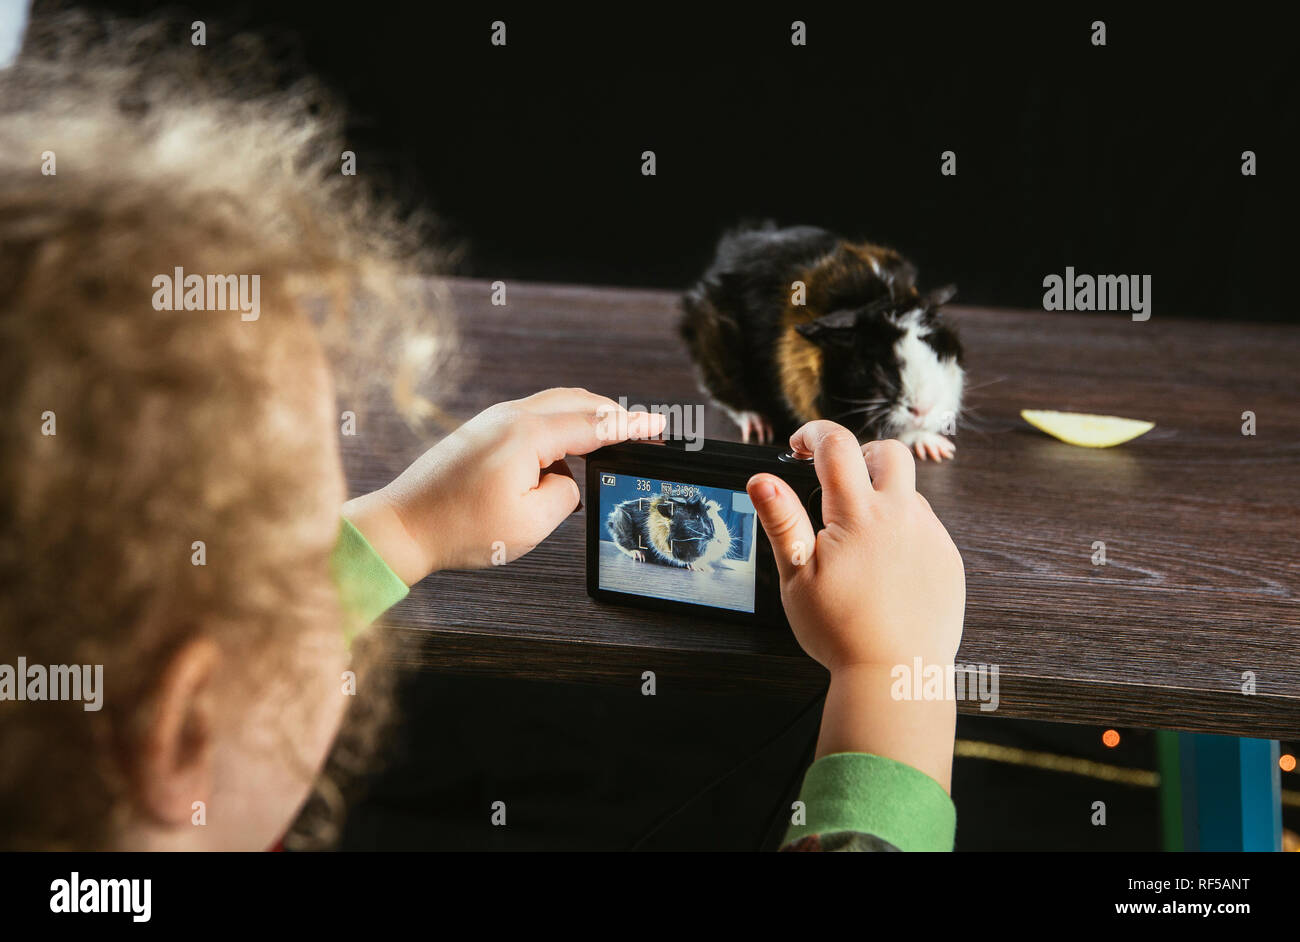 Girl child taking a picture with digital photo camera of young domestic guinea pig (Cavia porcellus), also known as cavy or domestic cavy indoors, bla Stock Photo